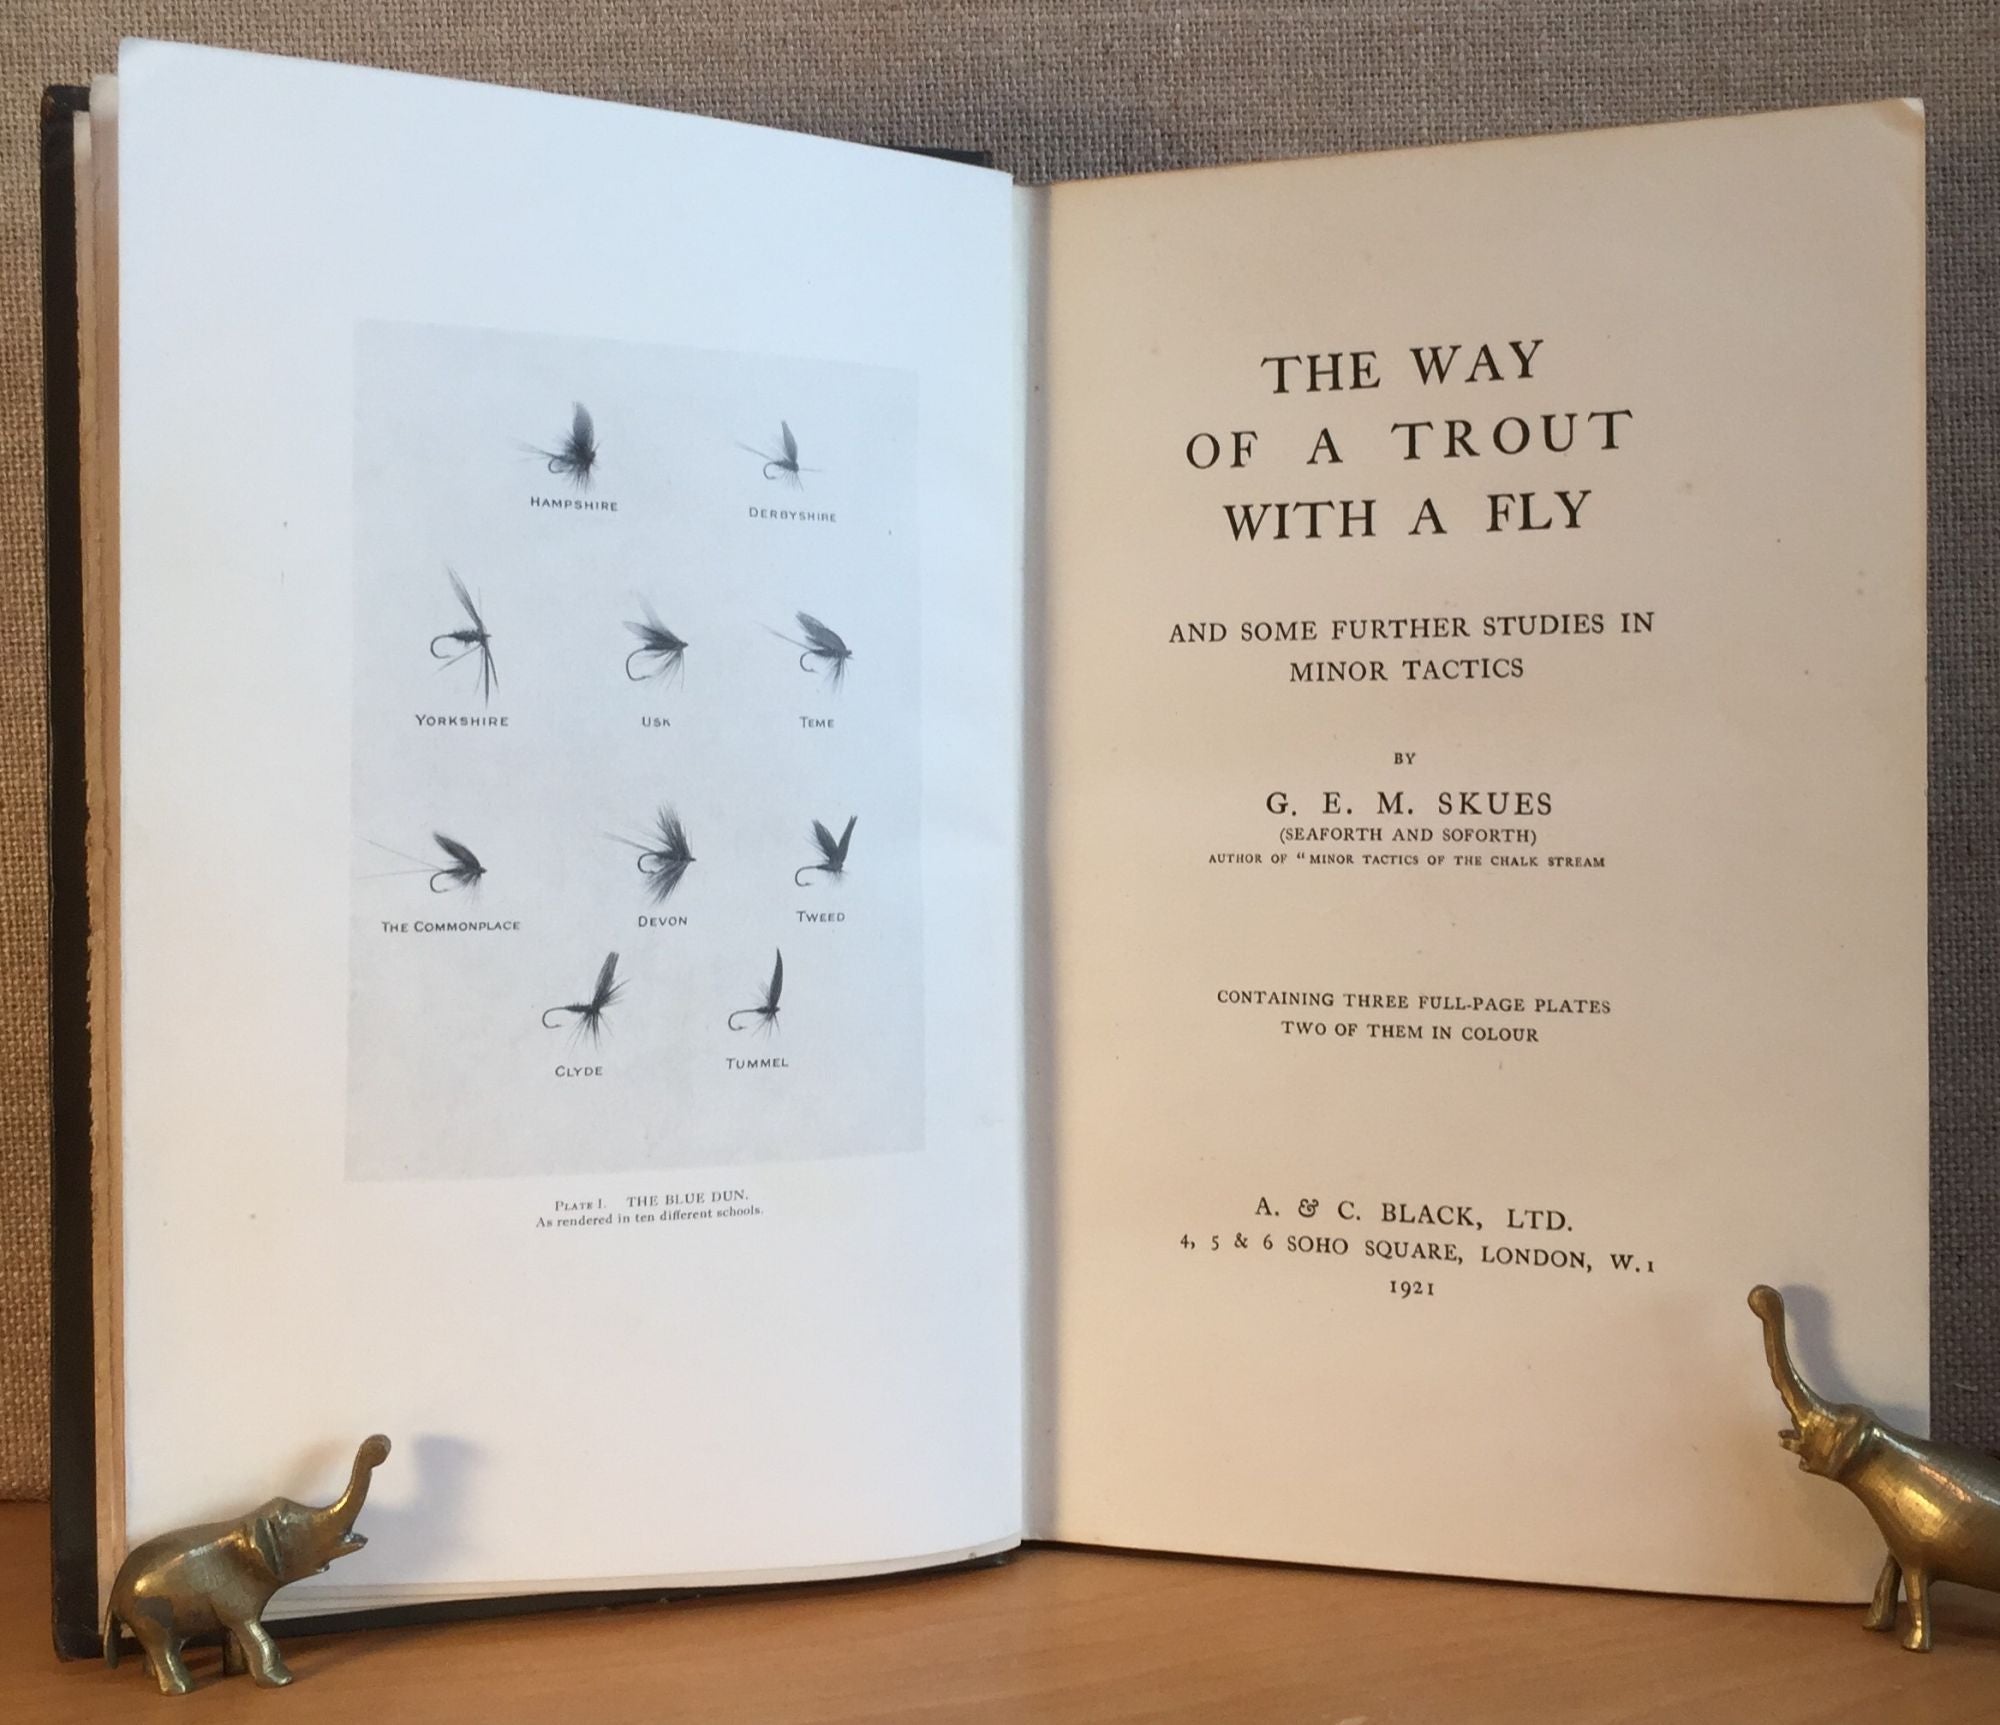 The Way of a Trout with a Fly and Some Further Studies in Minor Tactics by  G. E. M. Skues, George Edward MacKenzie on J. Michaels Books